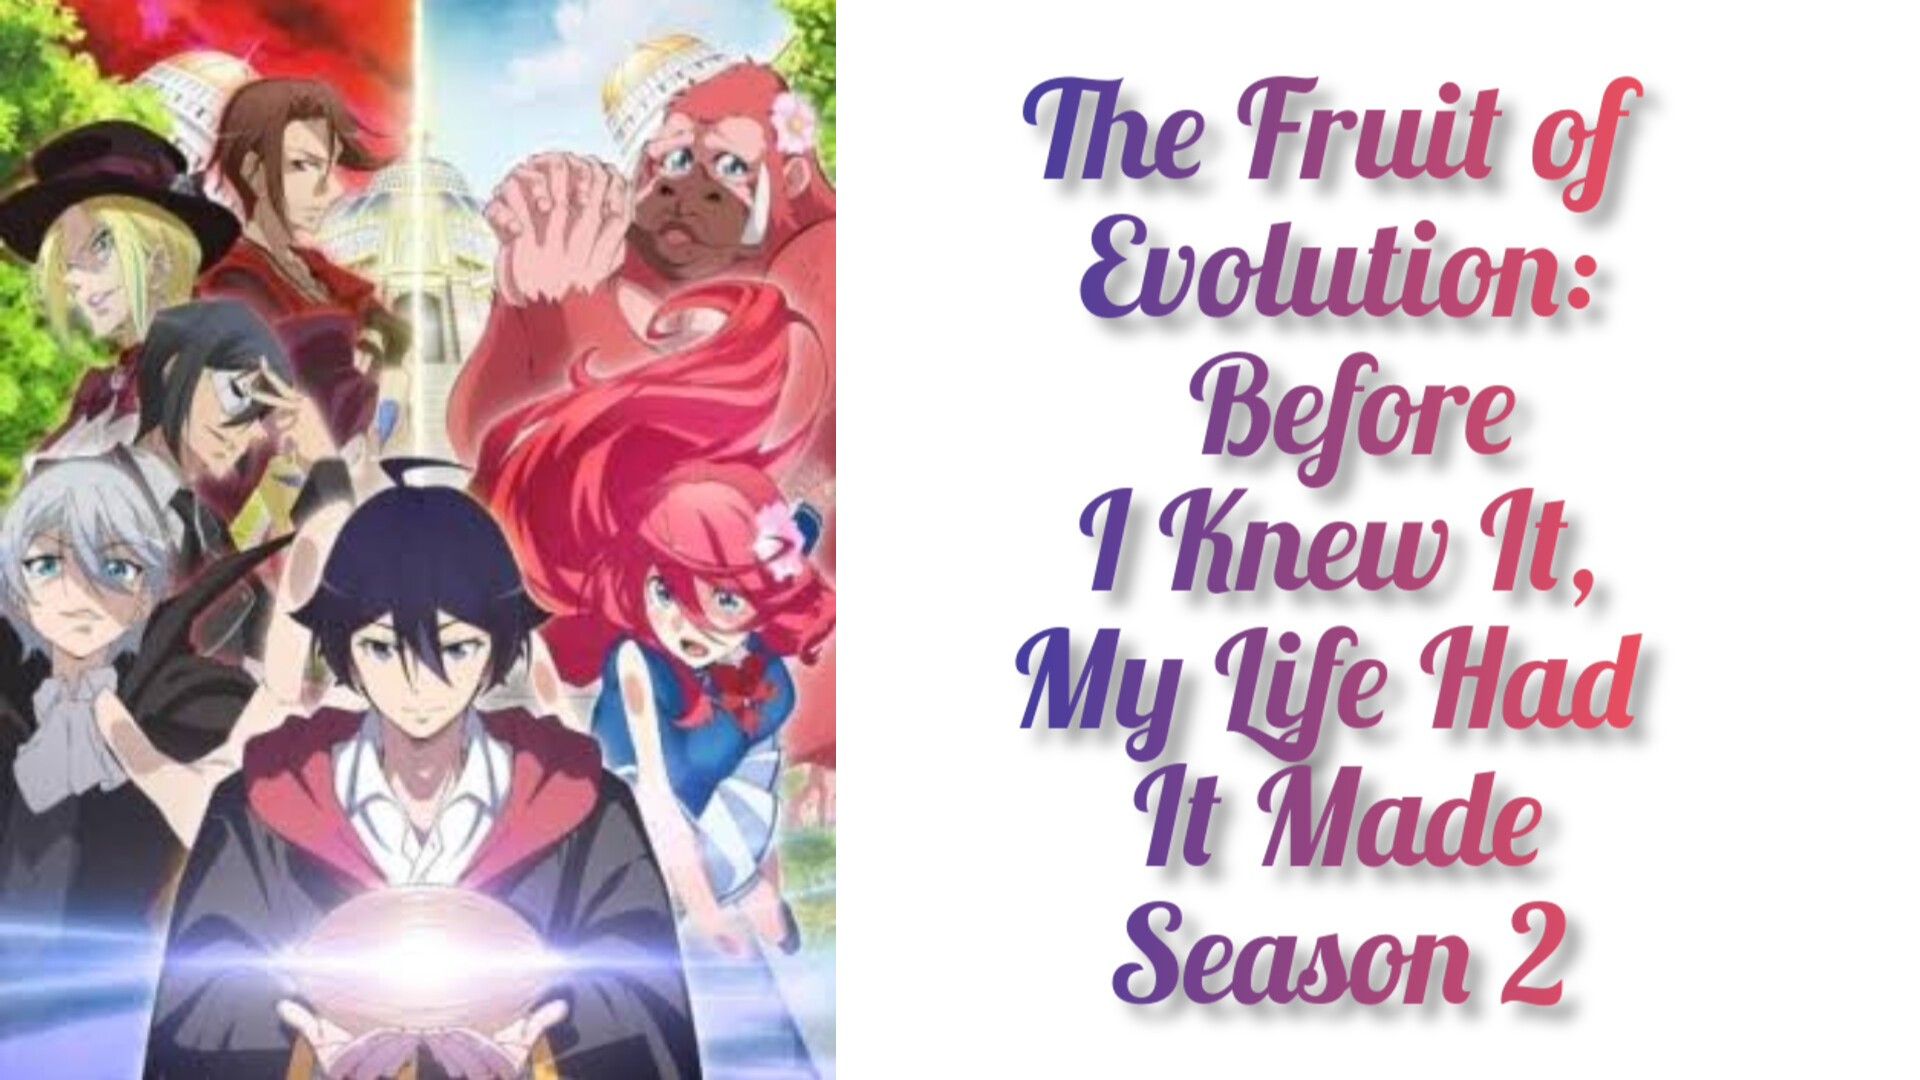 The Fruit of Evolution: Before I Knew It, My Life Had It Made